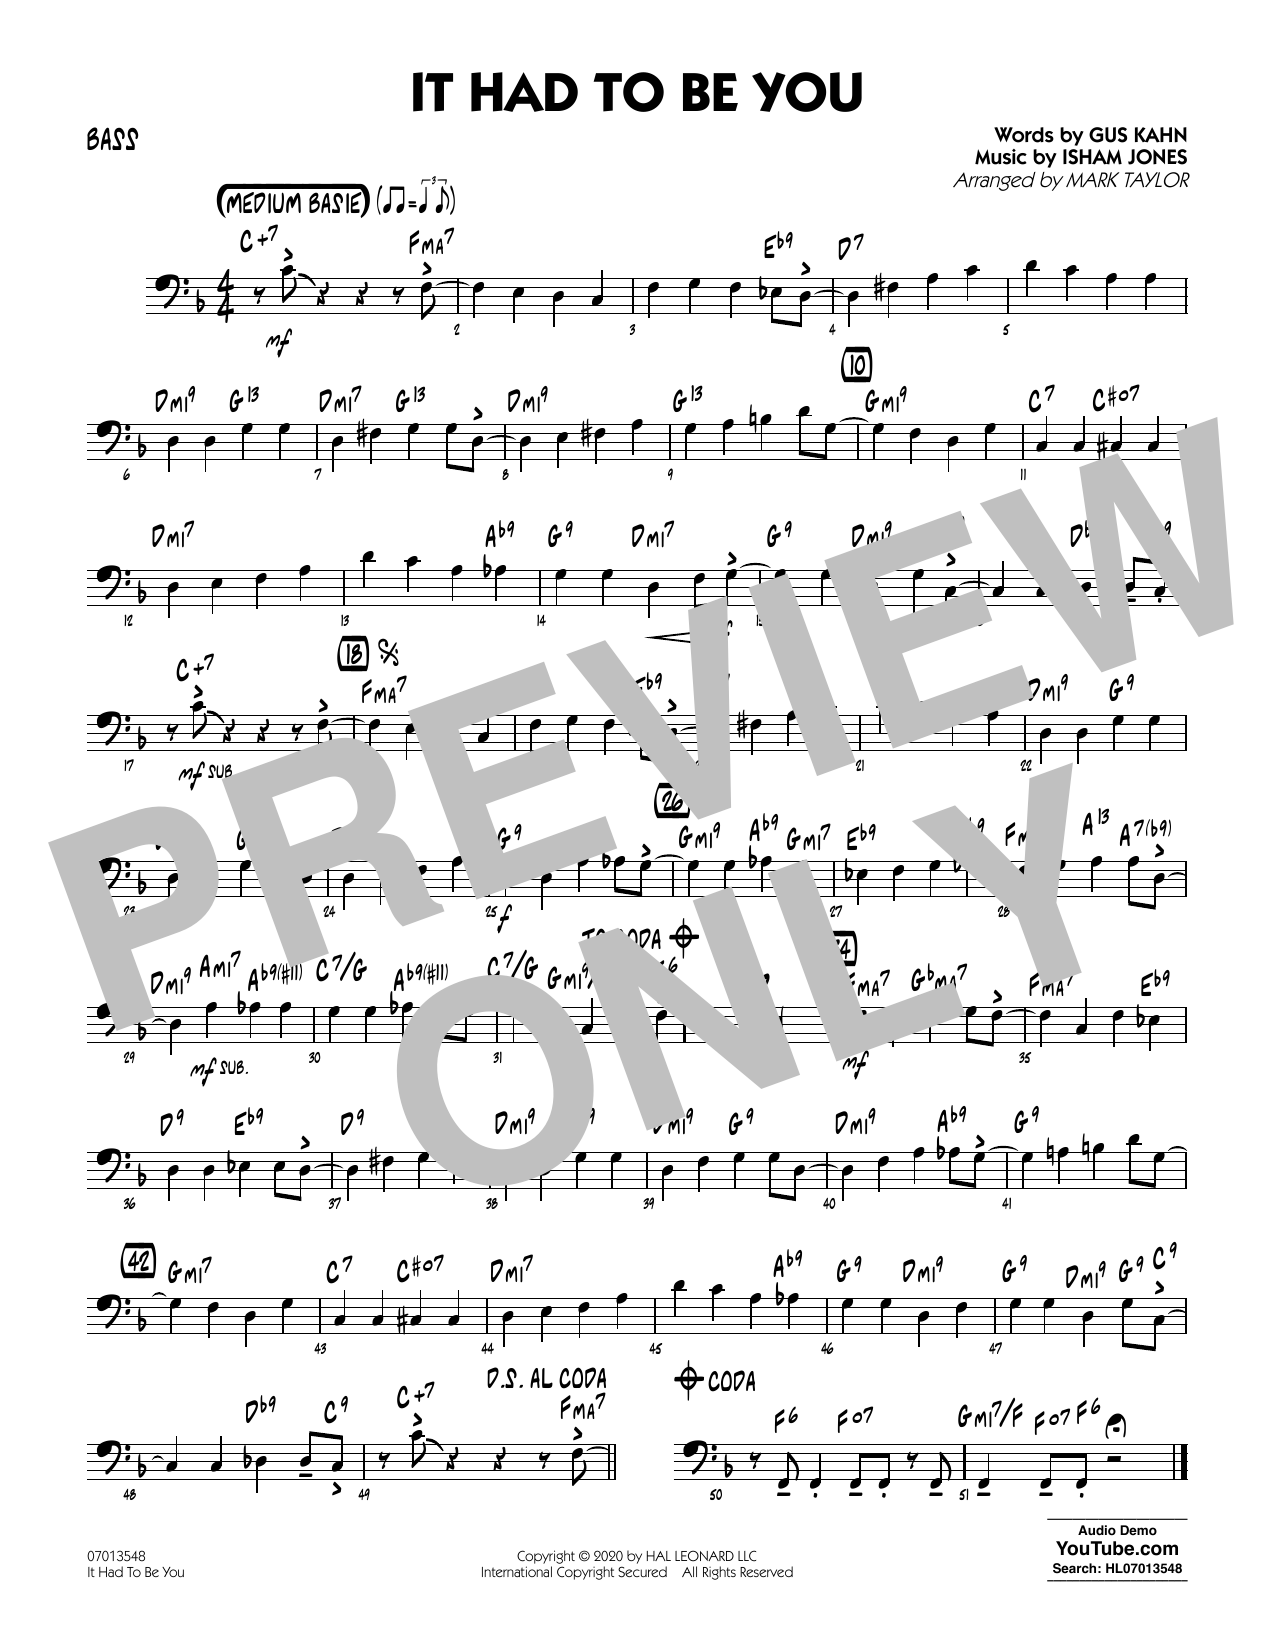 Download Isham Jones and Gus Kahn It Had to Be You (arr. Mark Taylor) - B Sheet Music